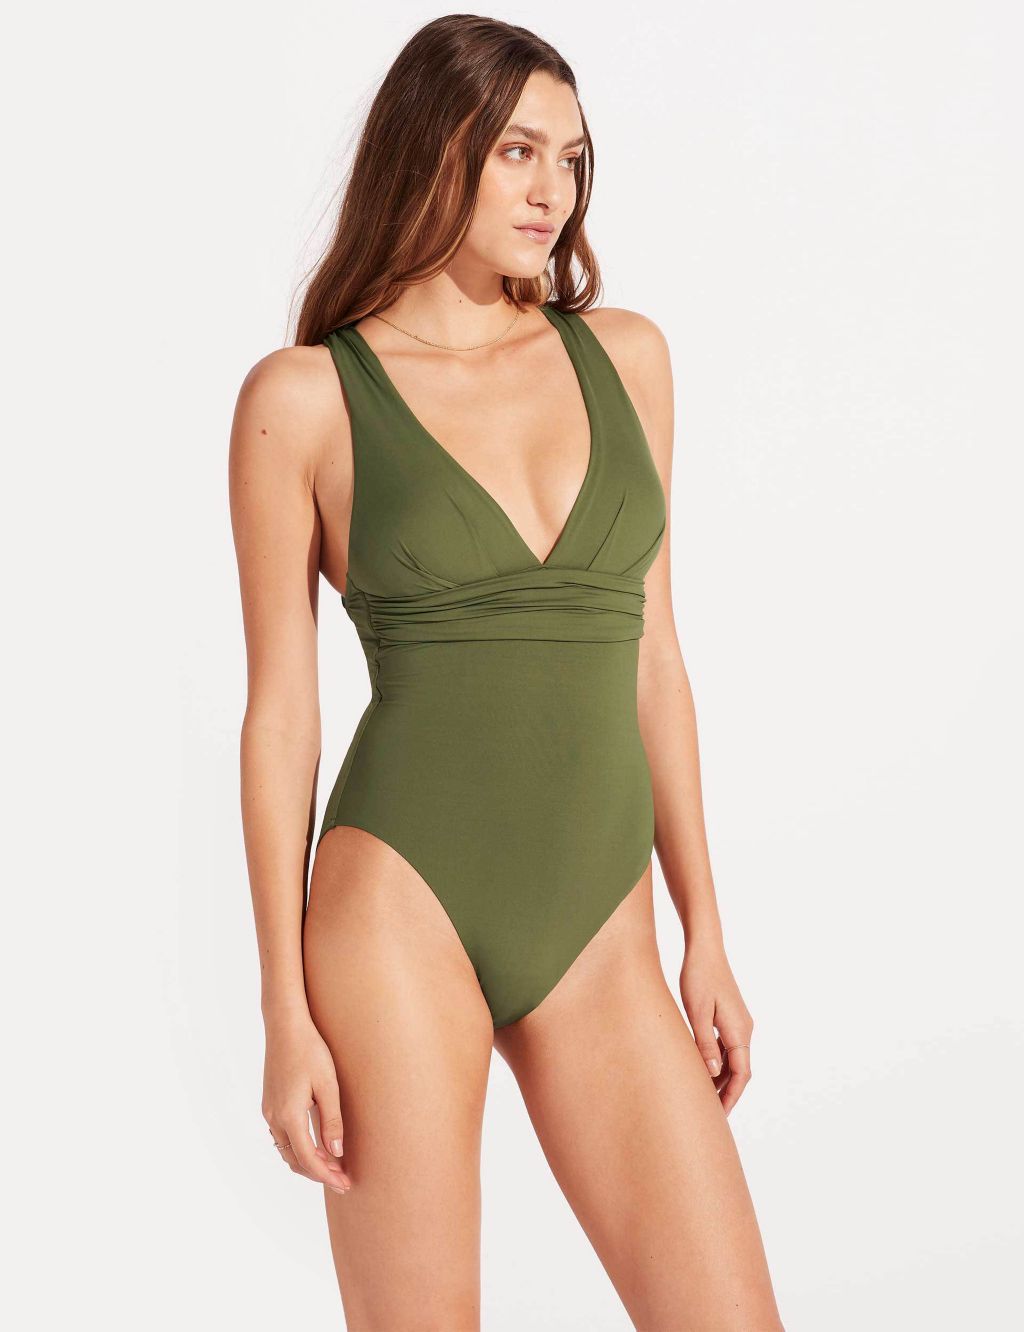 Collective Padded Plunge Swimsuit image 5